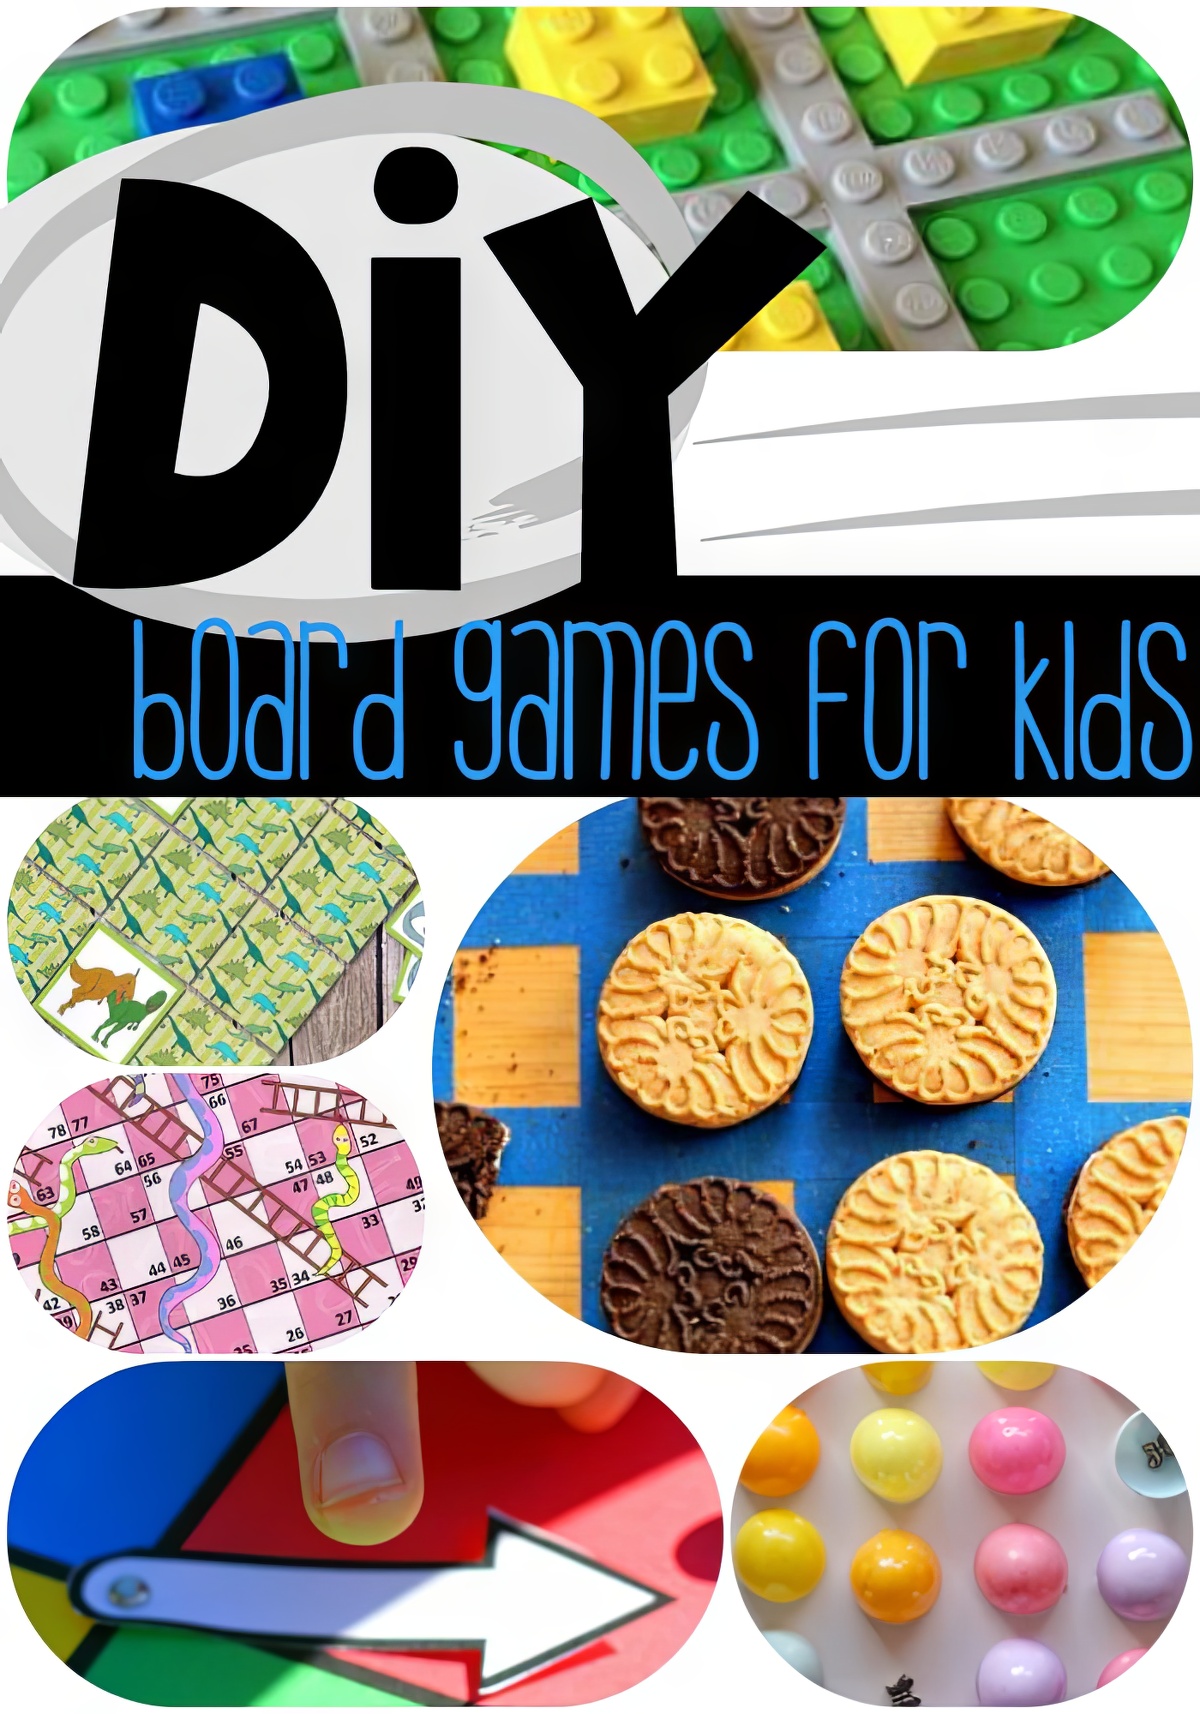 DIY Board Games For Kids, 8 do-it-yourself board games 